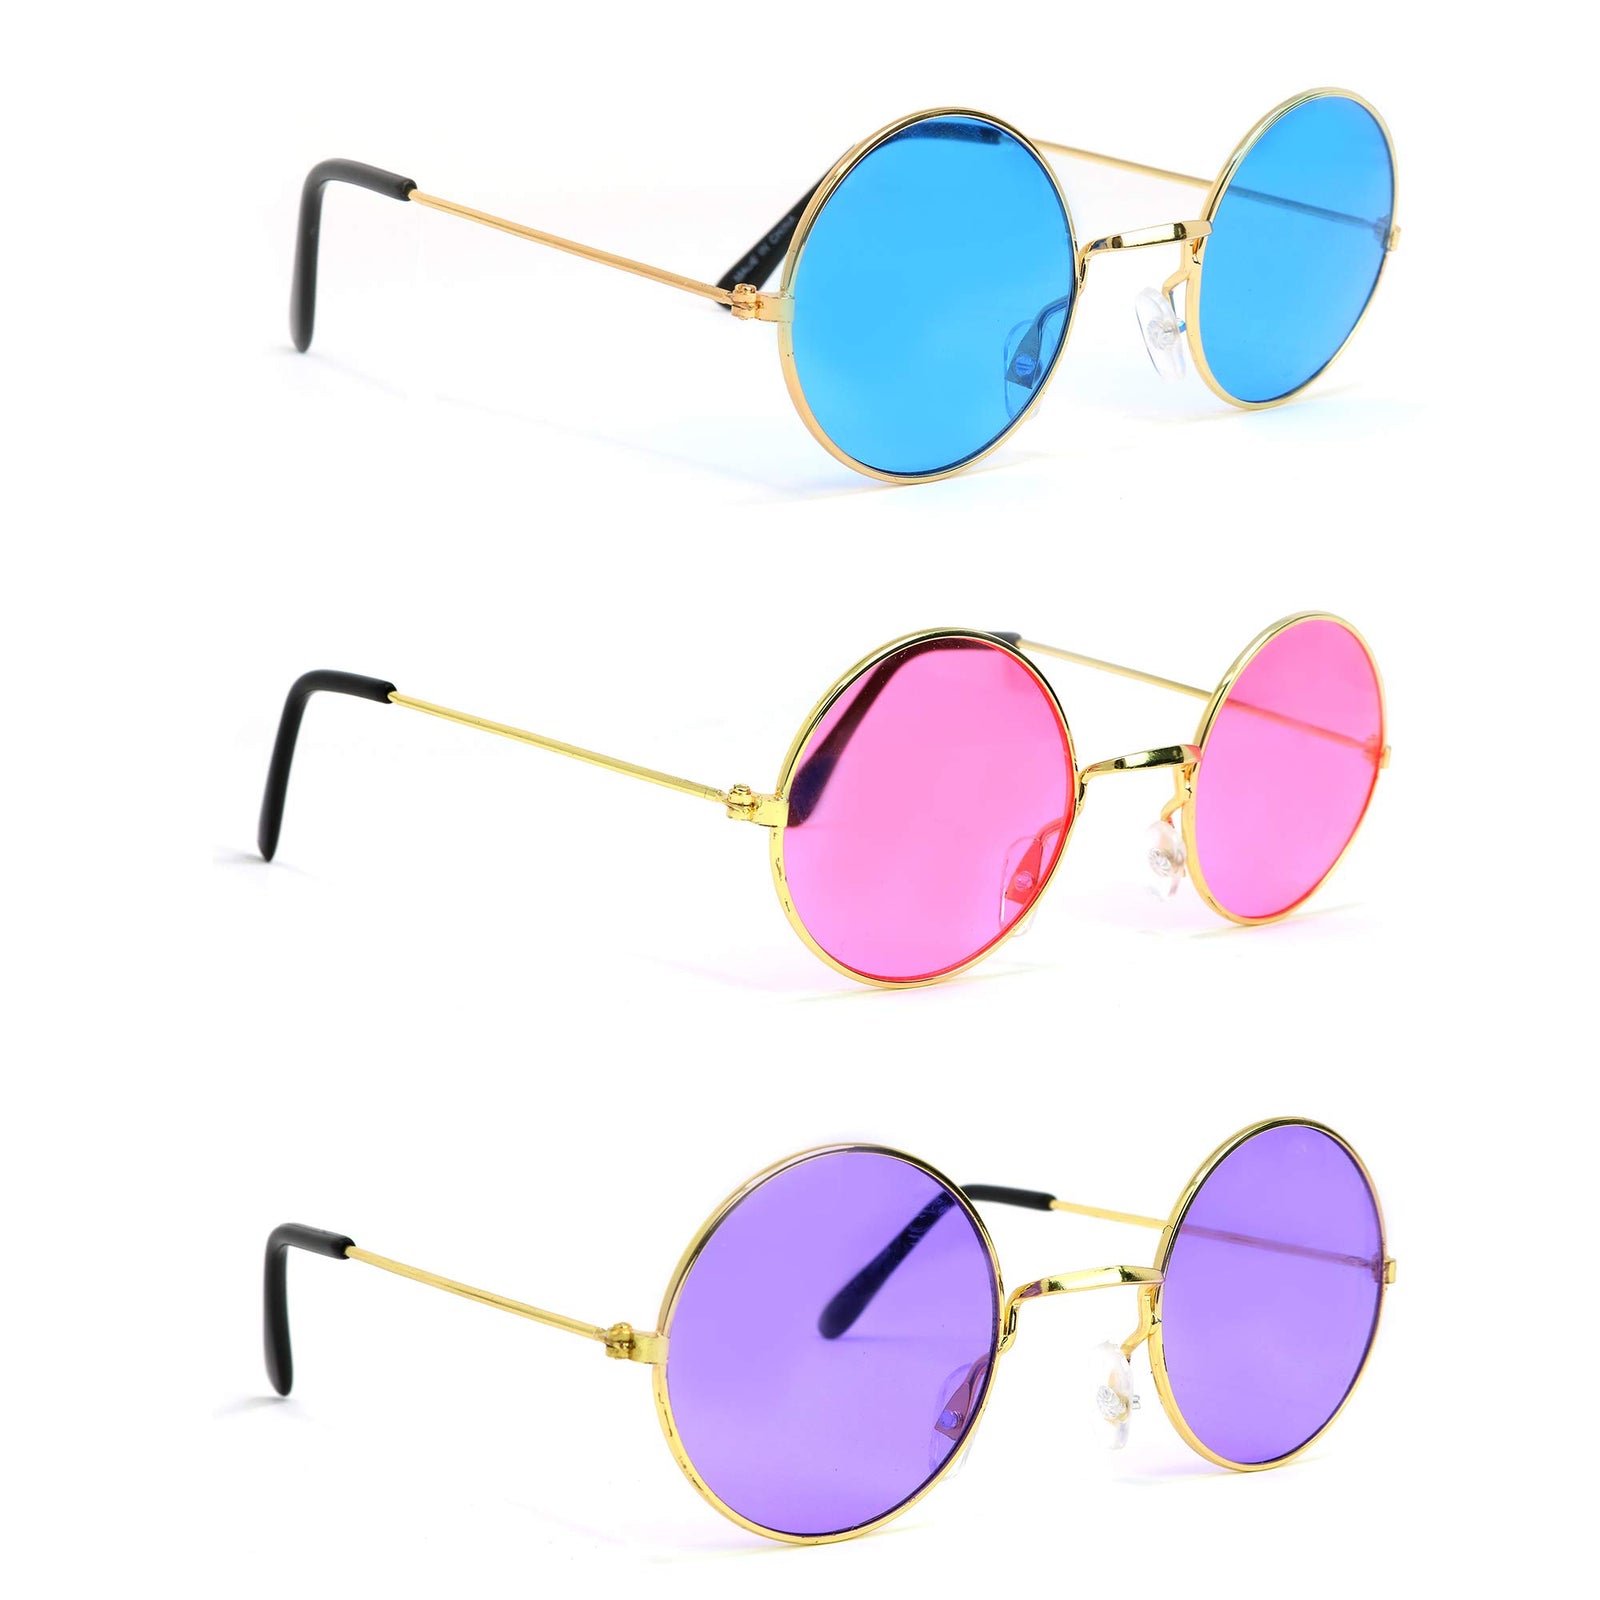 Skeleteen Tinted Round Hippie Glasses – Pink Purple And Blue 60's Style Hipster Circle Sunglasses - 3 Pairs